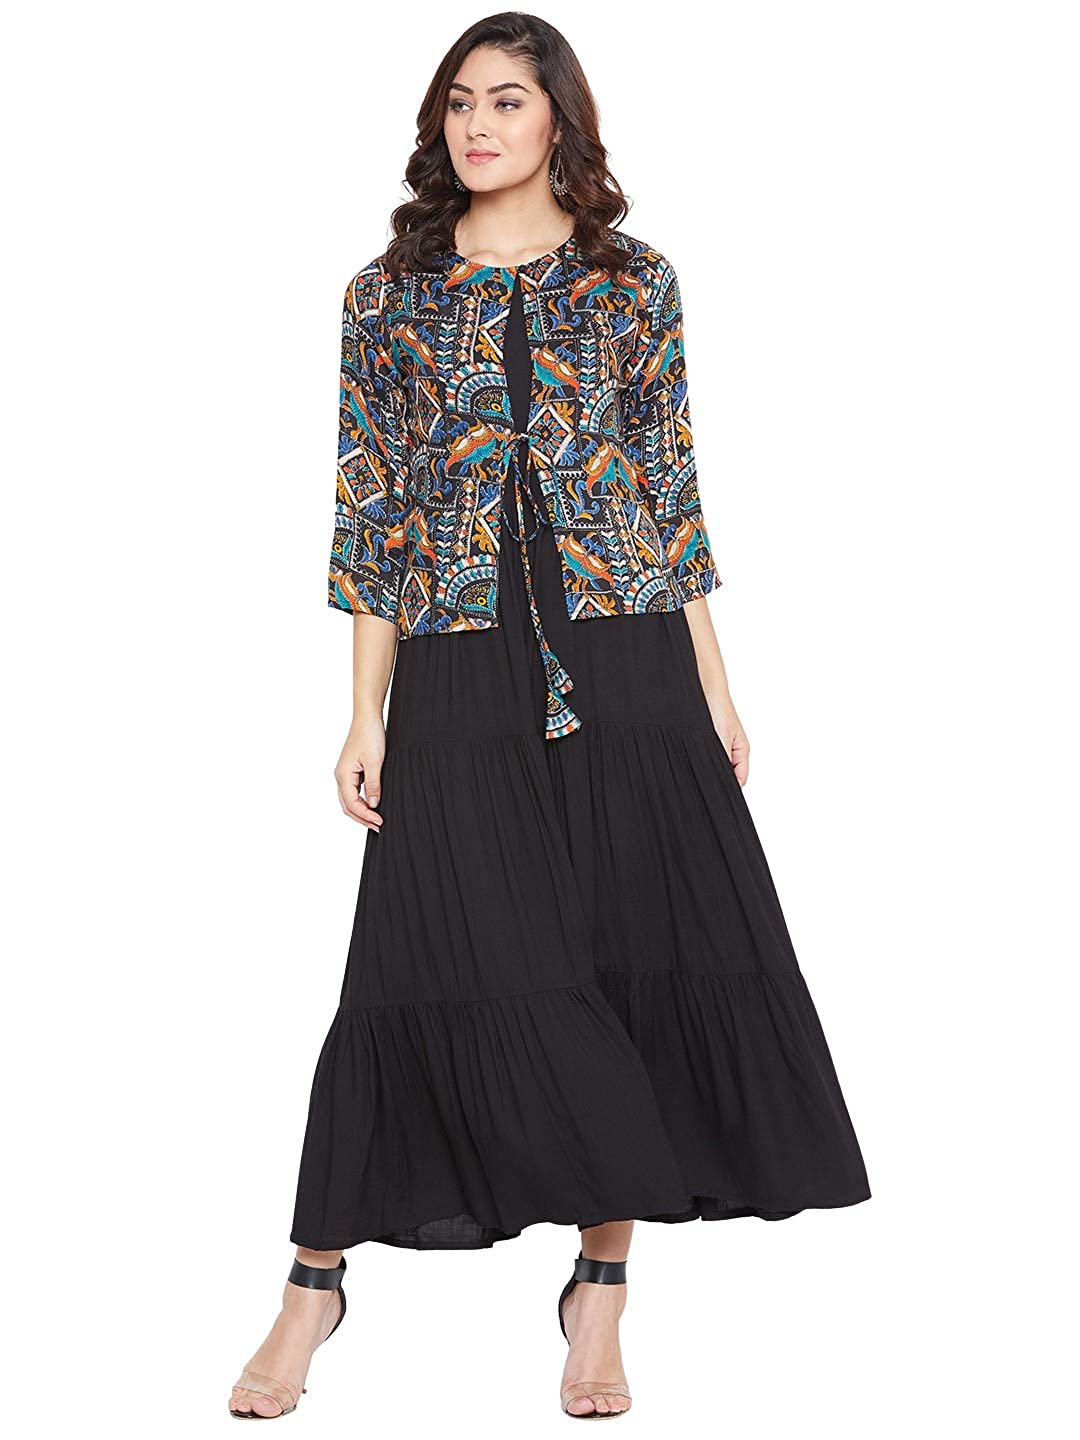 HELLO DESIGN Women's Rayon 3/4 Sleeve Flared Full-Length Maxi Dress -  DRESSES in Sri Lanka from Arcade Online Shopping - Just Rs. 6299!